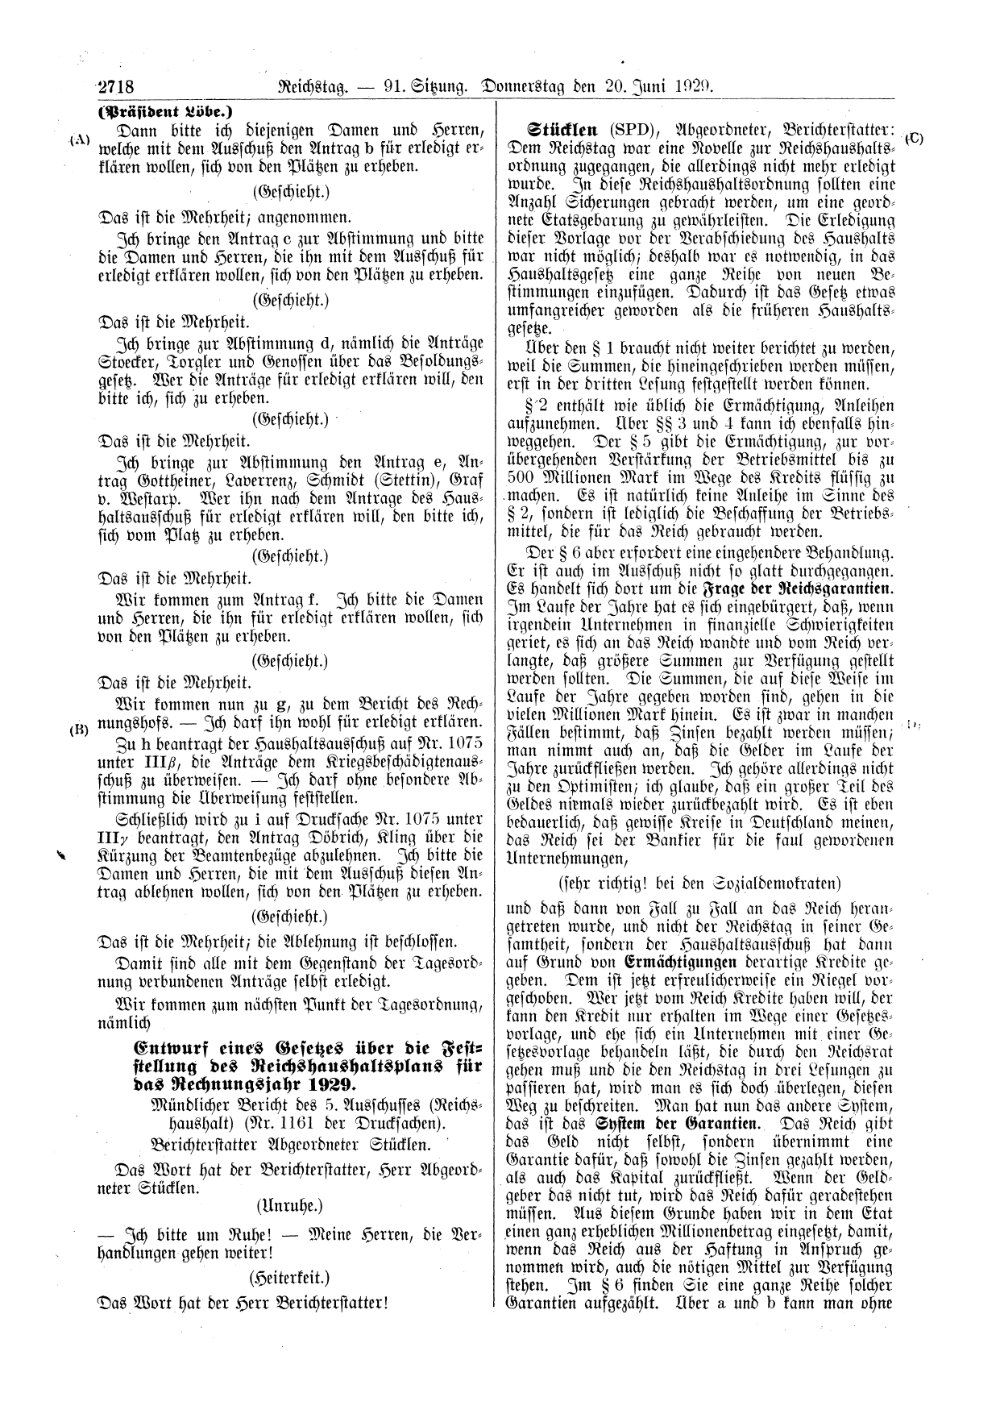 Scan of page 2718